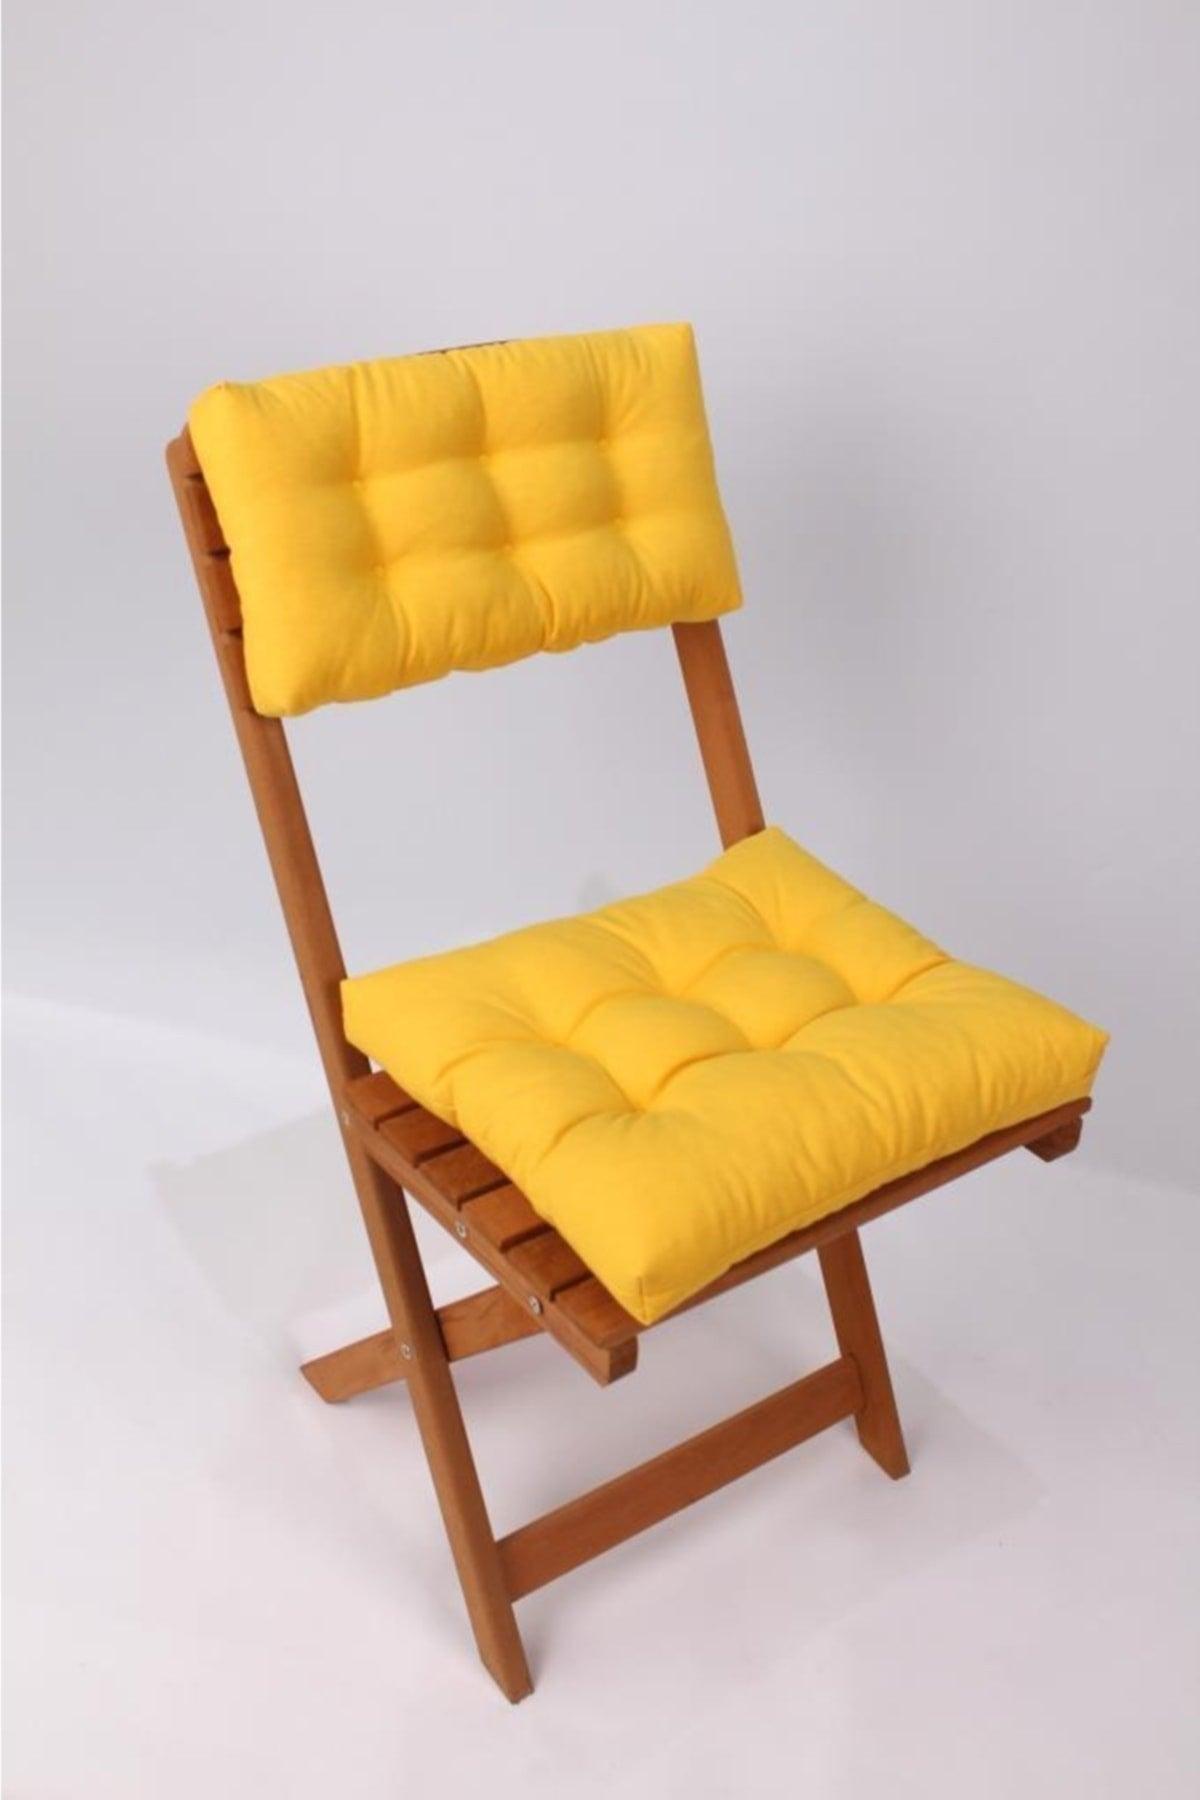 Lux Bistro Kitchen Garden Chair Cushion With Backrest Yellow (CUSH AND BACK CUSHION) - Swordslife